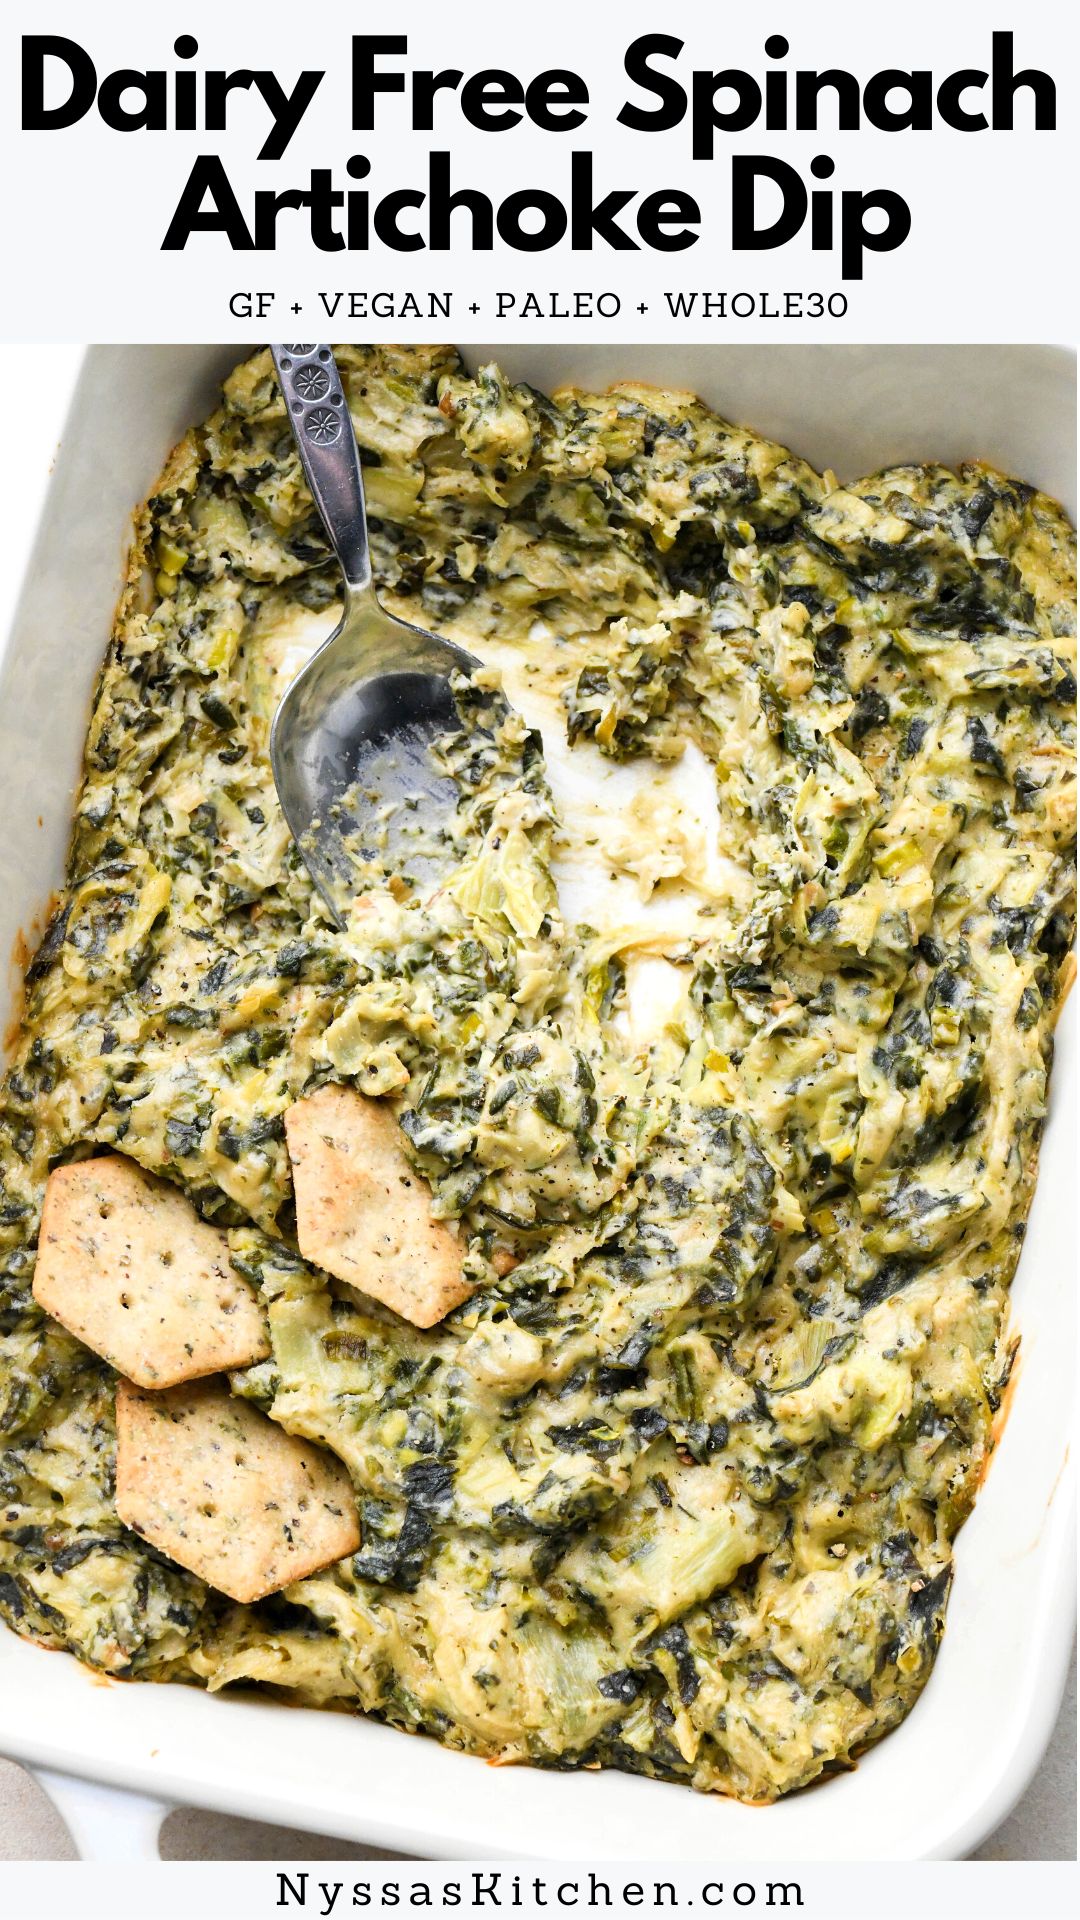 This dairy free spinach artichoke dip is a super luscious (healthy!) version of this classic snack dip. Served warm, and made with raw cashews, artichokes, spinach, and a variety of whole food flavor boosters for a recipe that everyone will enjoy! Made without mayonnaise, cream cheese, sour cream, or store bought vegan cheese. Vegan, Whole30, lactose free, and paleo.